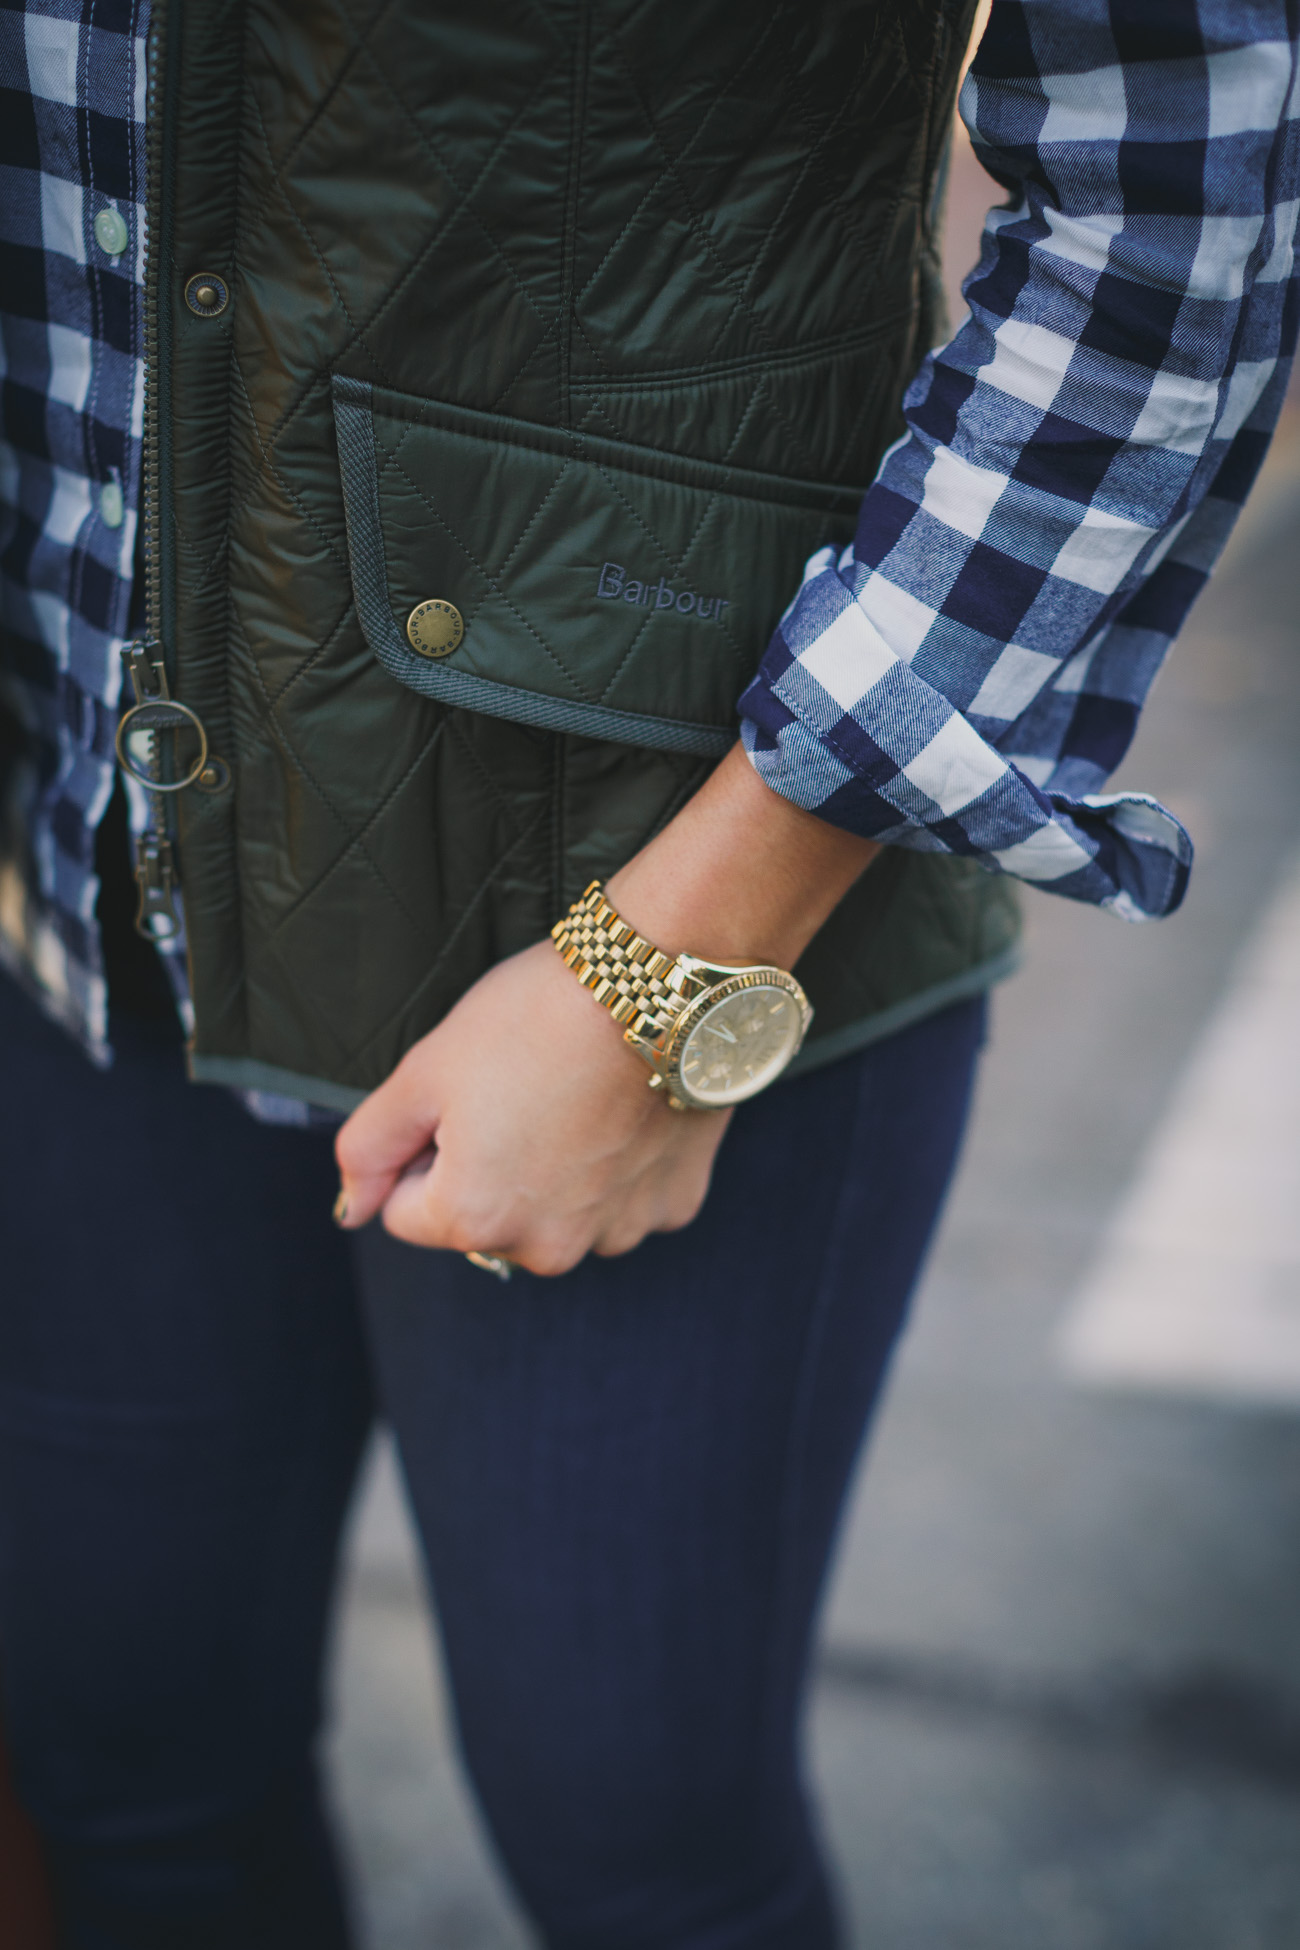 barbour quilted vest, preppy outfit, fall style, fall fashion, buffalo check shirt, buffalo plaid shirt, barbour vest, barbour outfit, fall barbour outfit, j.crew all day tote // grace wainwright a southern drawl